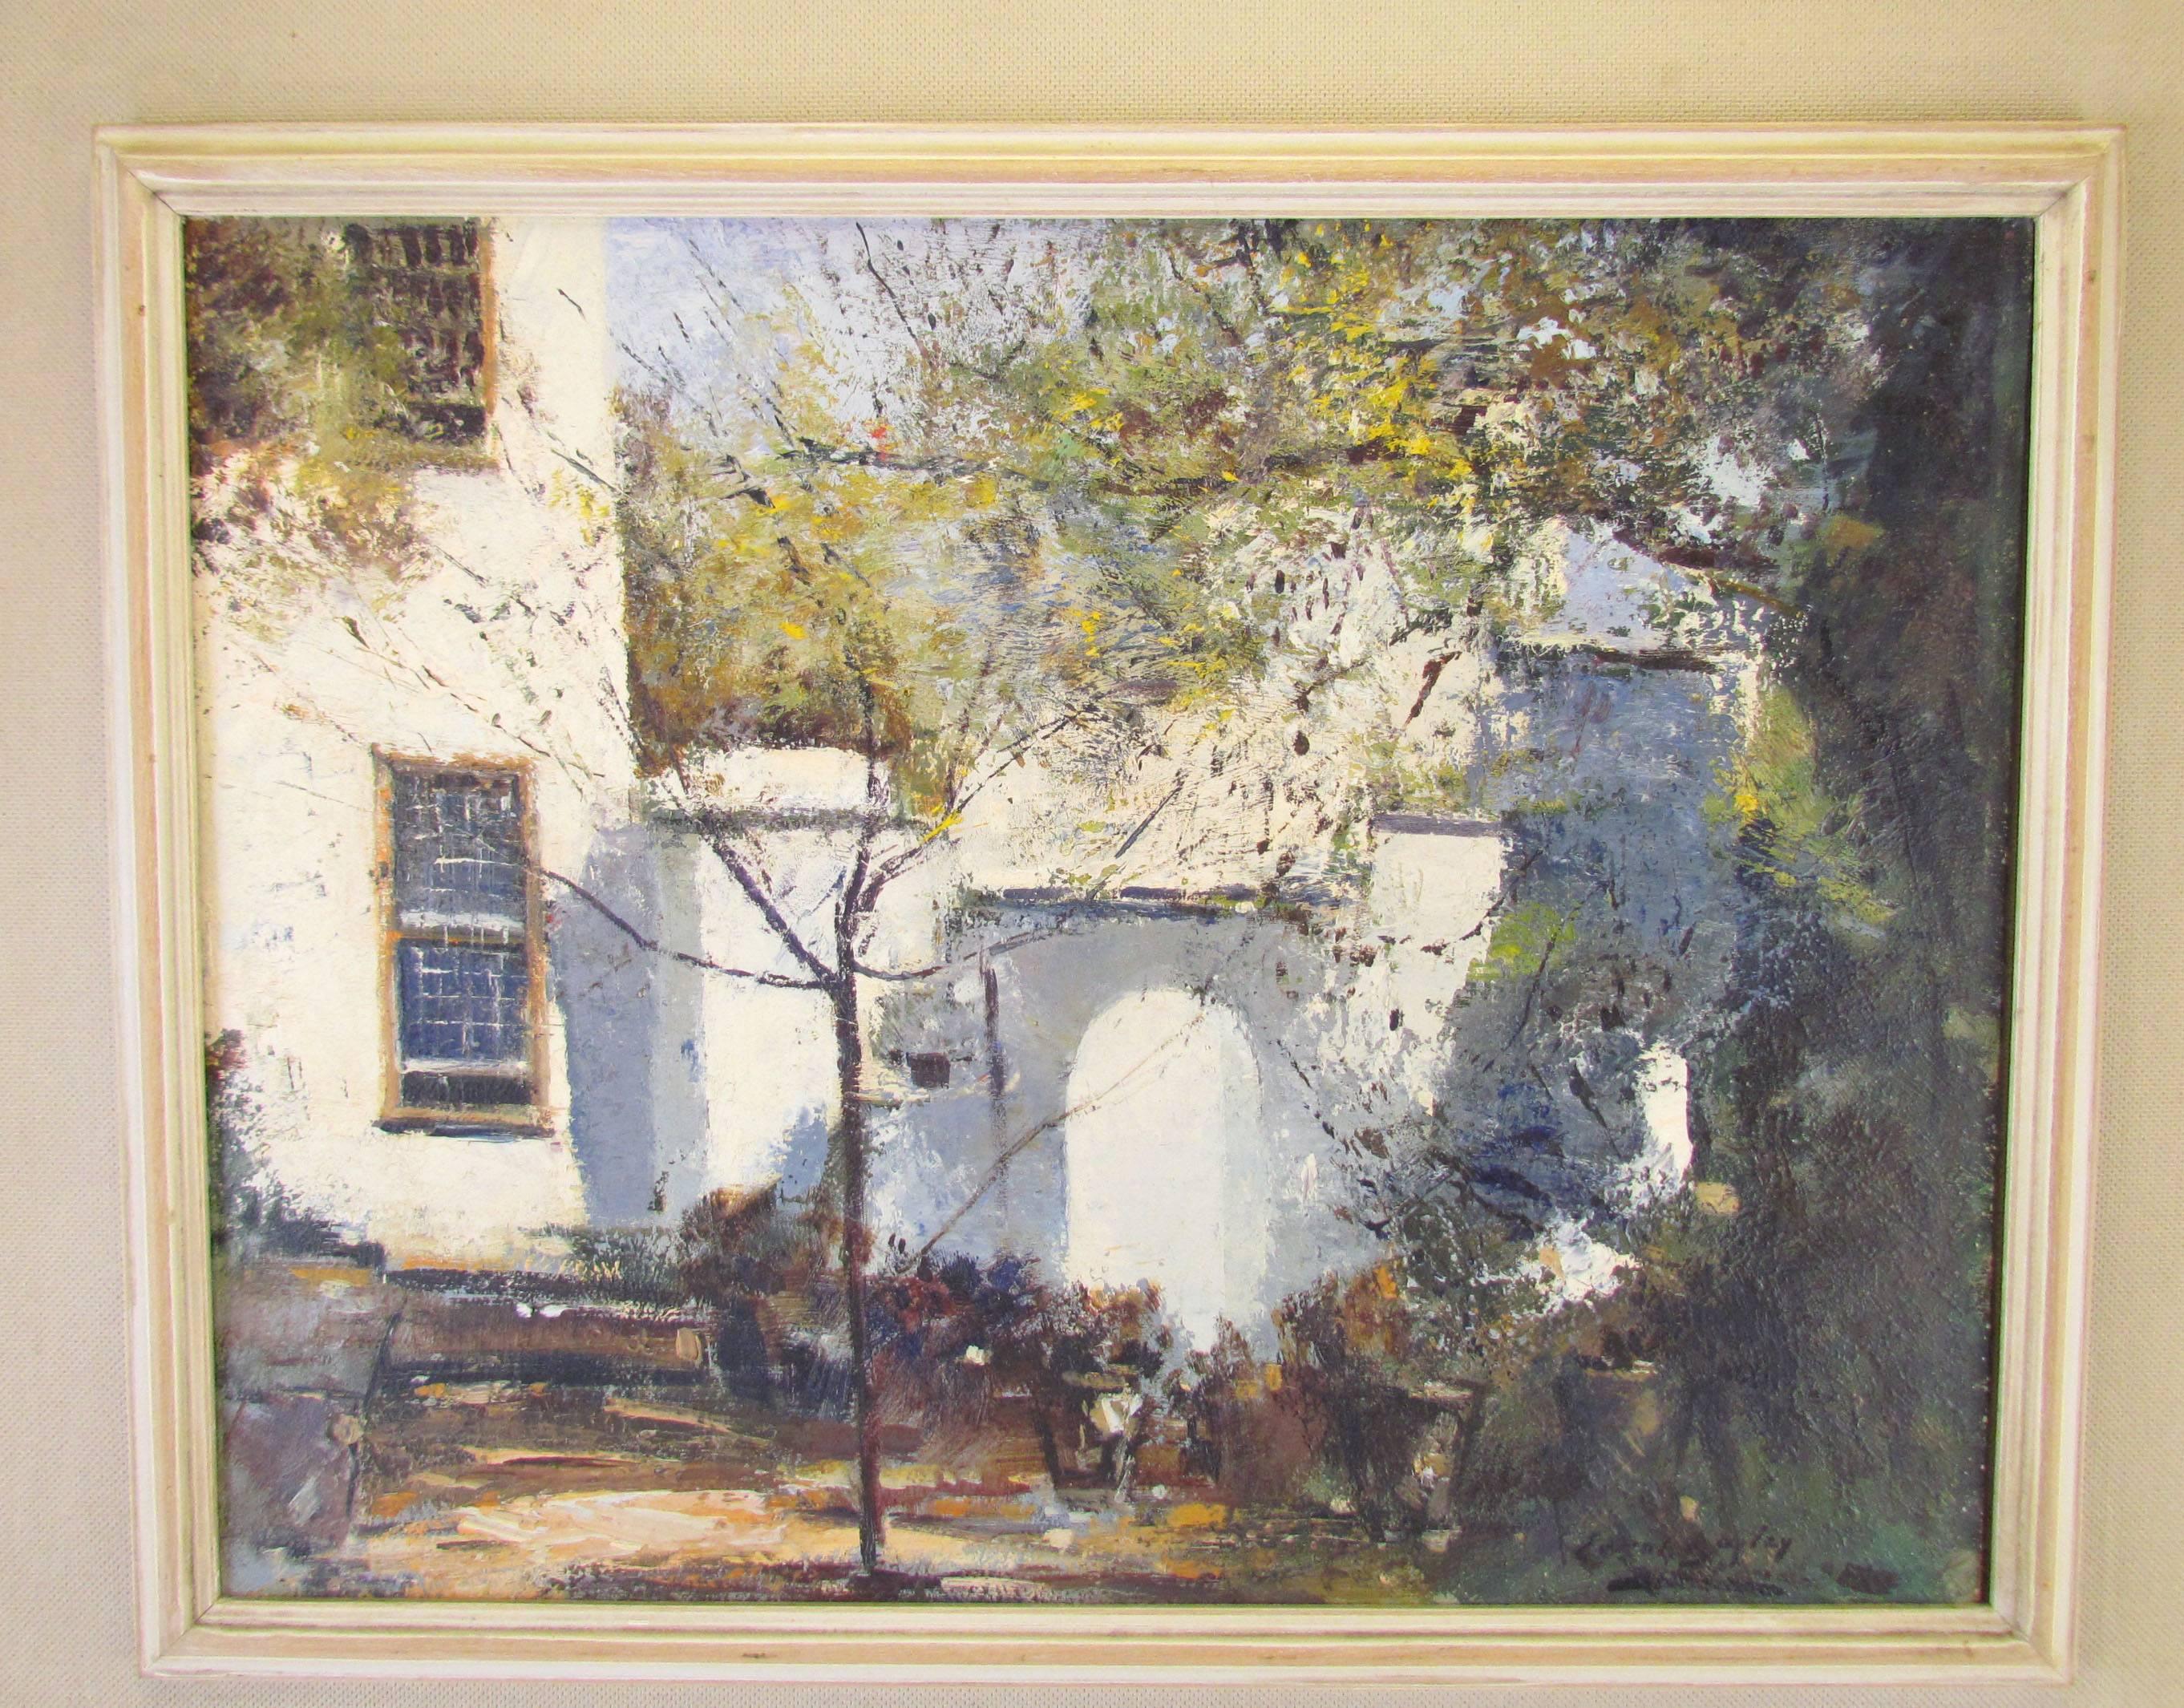 Impressionistic oil painting by important South African artist Errol Stephen Boyley (1918- 2007). In its original period frame.

As framed, this measures 27" x 23"; canvas size is 18" x 14".